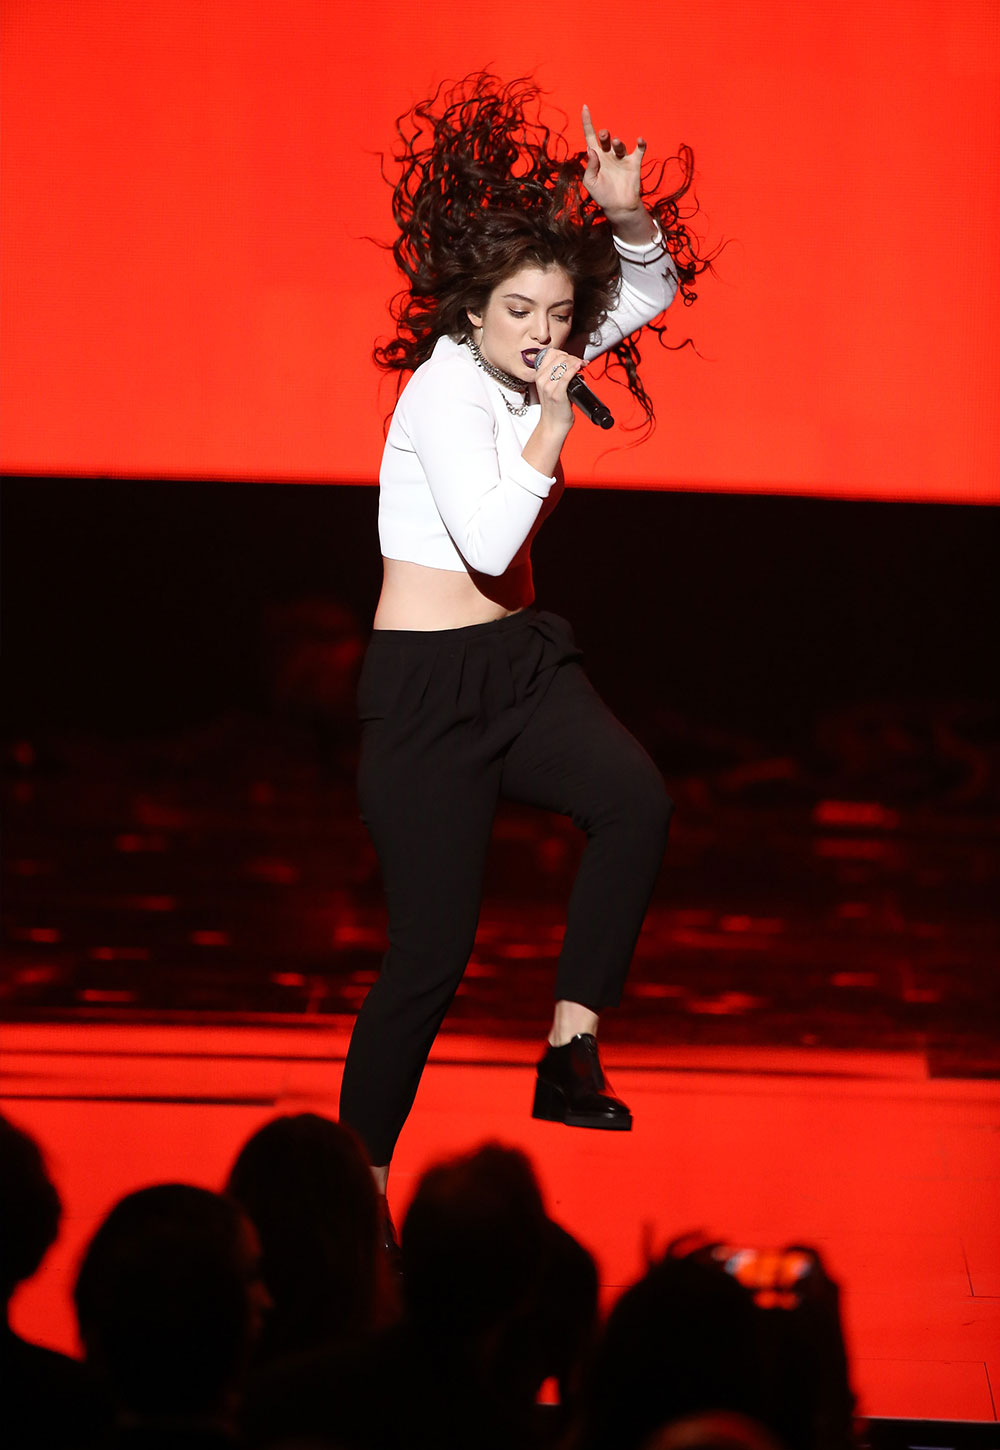 Lorde's dancing style stole the show at the 2014 American Music Awards.